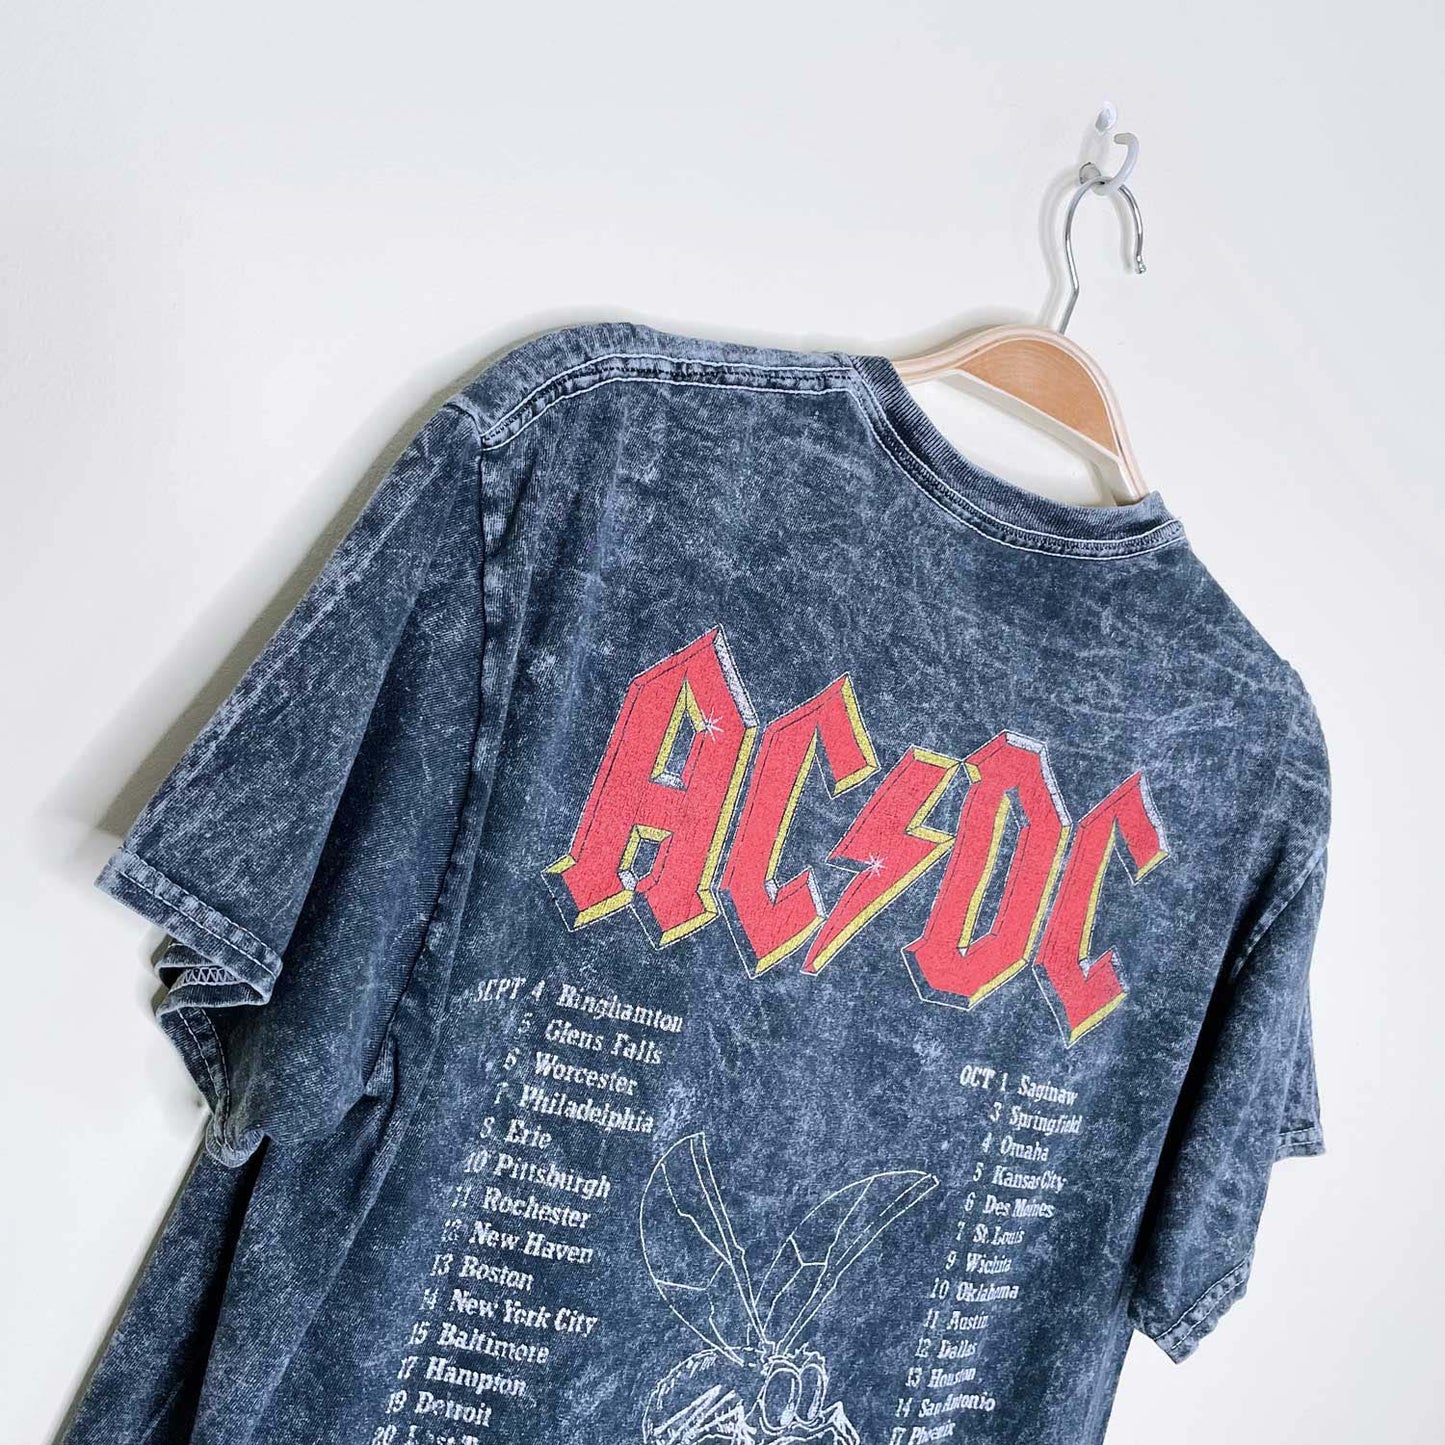 acdc 2015 fly on the wall tour '85 - size small